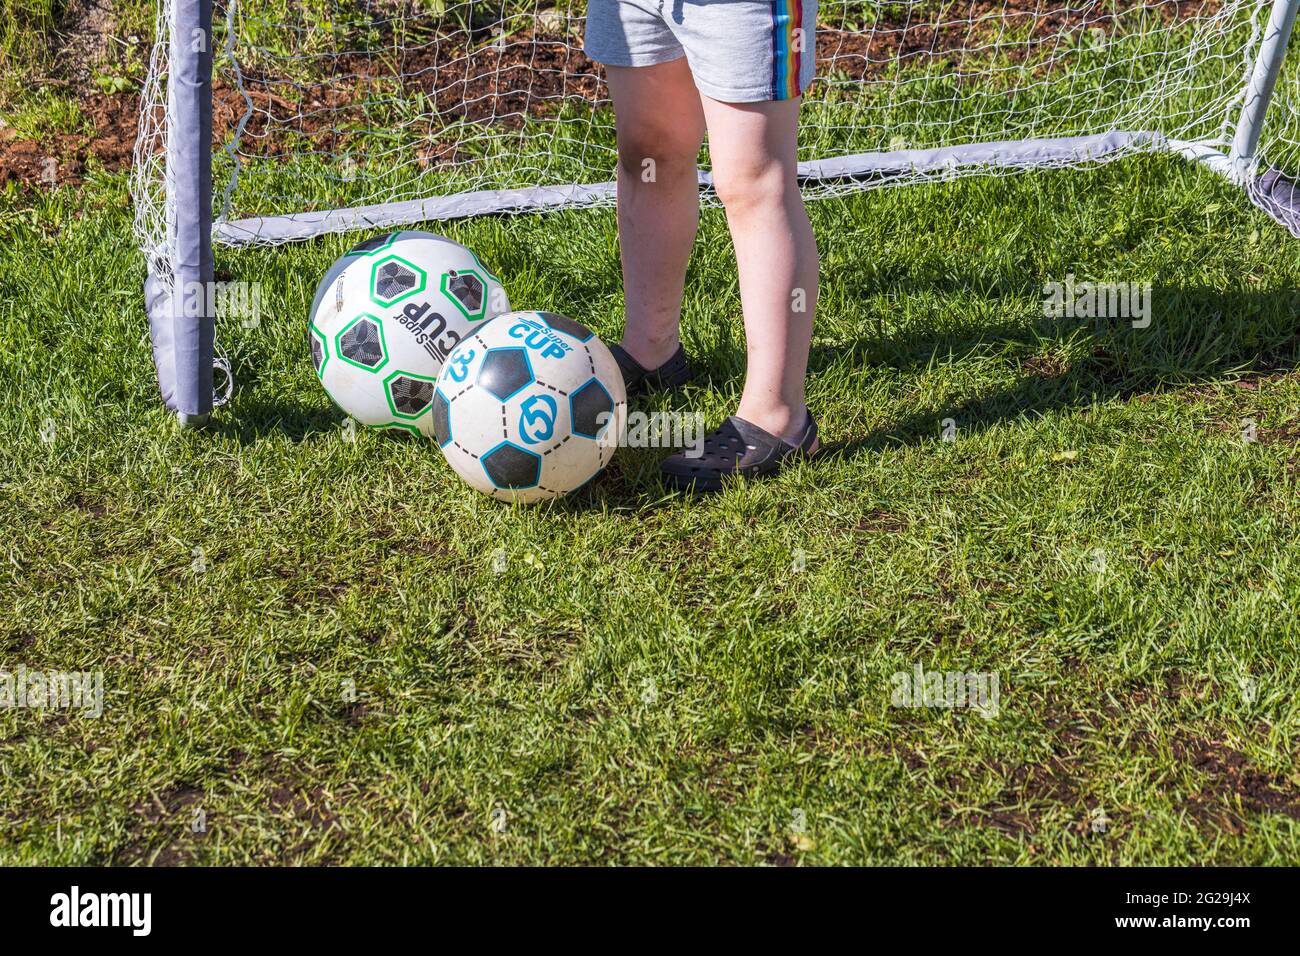 Close up view of the child's feet near two balls on football goal background. Stock Photo